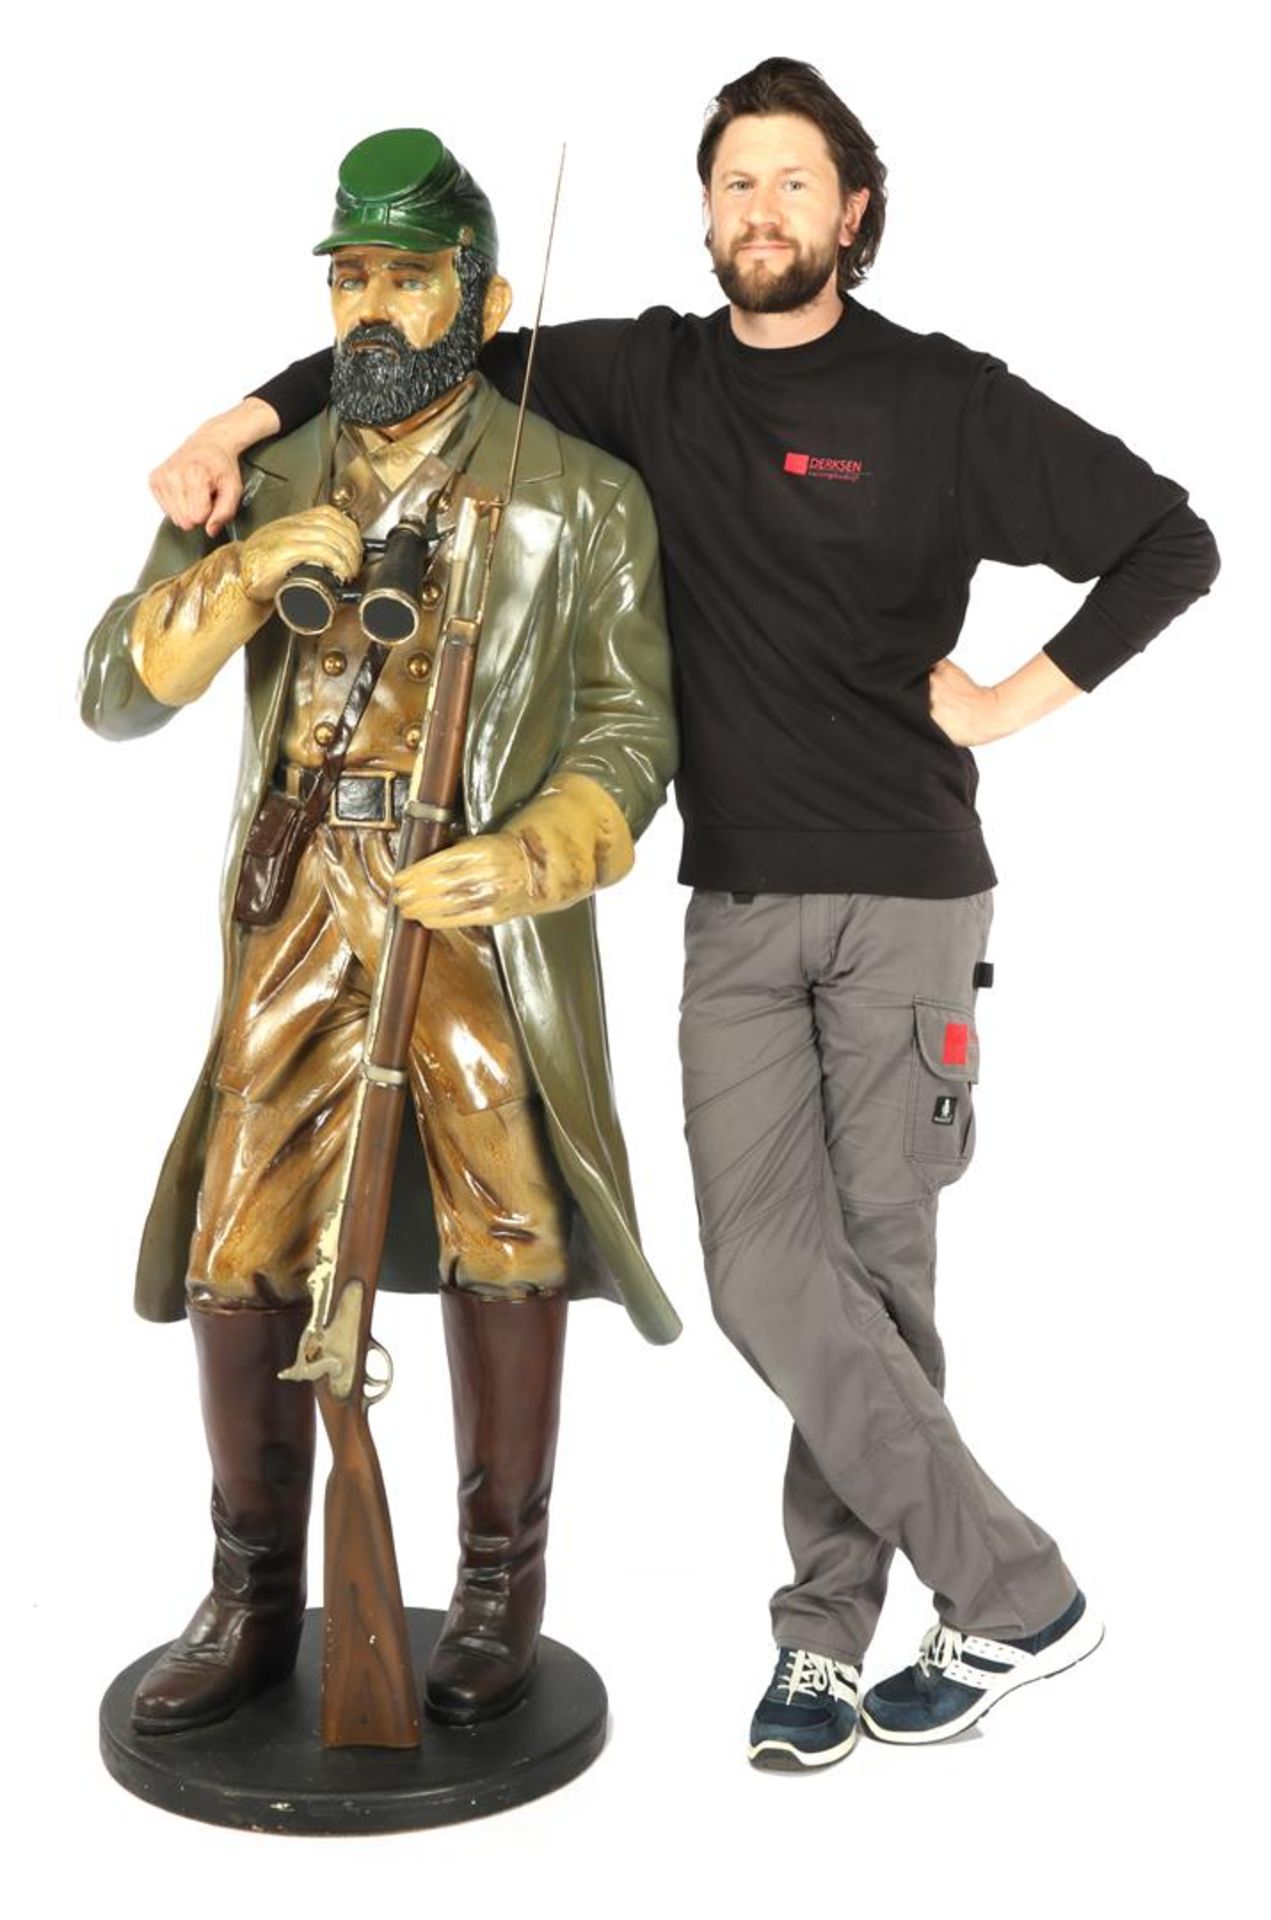 Plastic polychrome colored statue of a soldier with rifle and binoculars 184 cm high